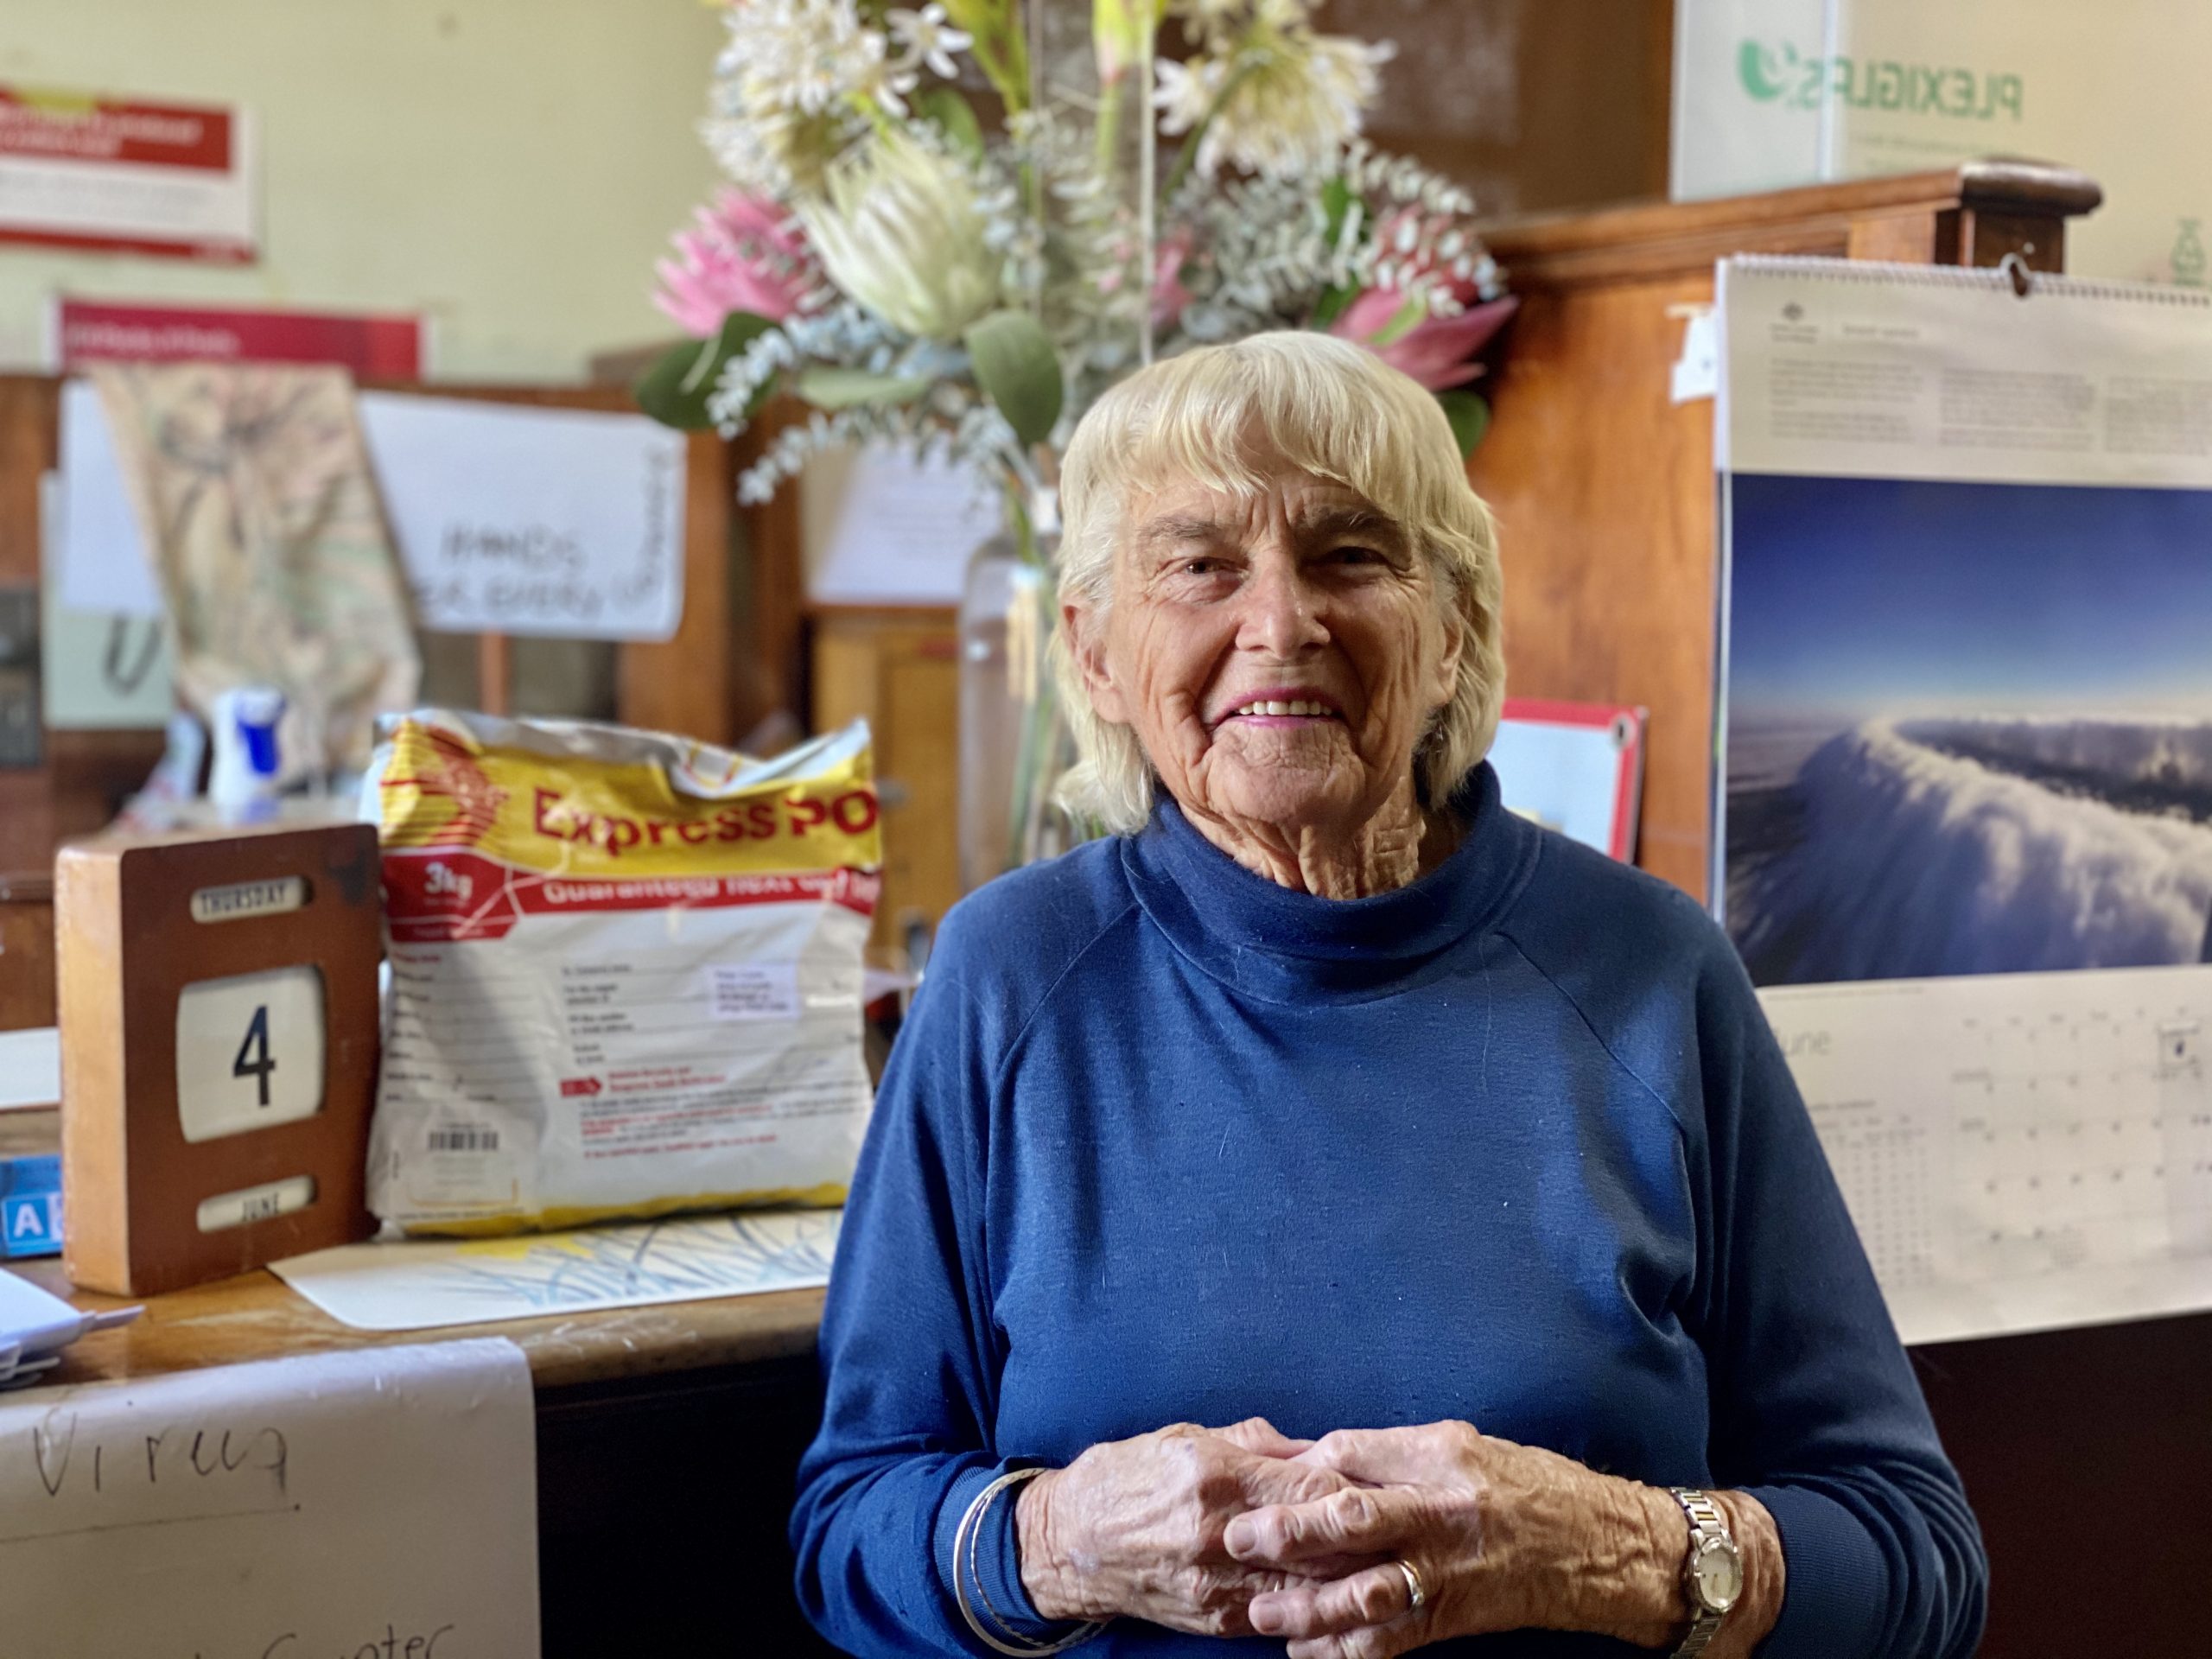 “Get up and have a go” – 81-year-old Pilliga Post Office licensee Merle Wooldridge shares words of wisdom